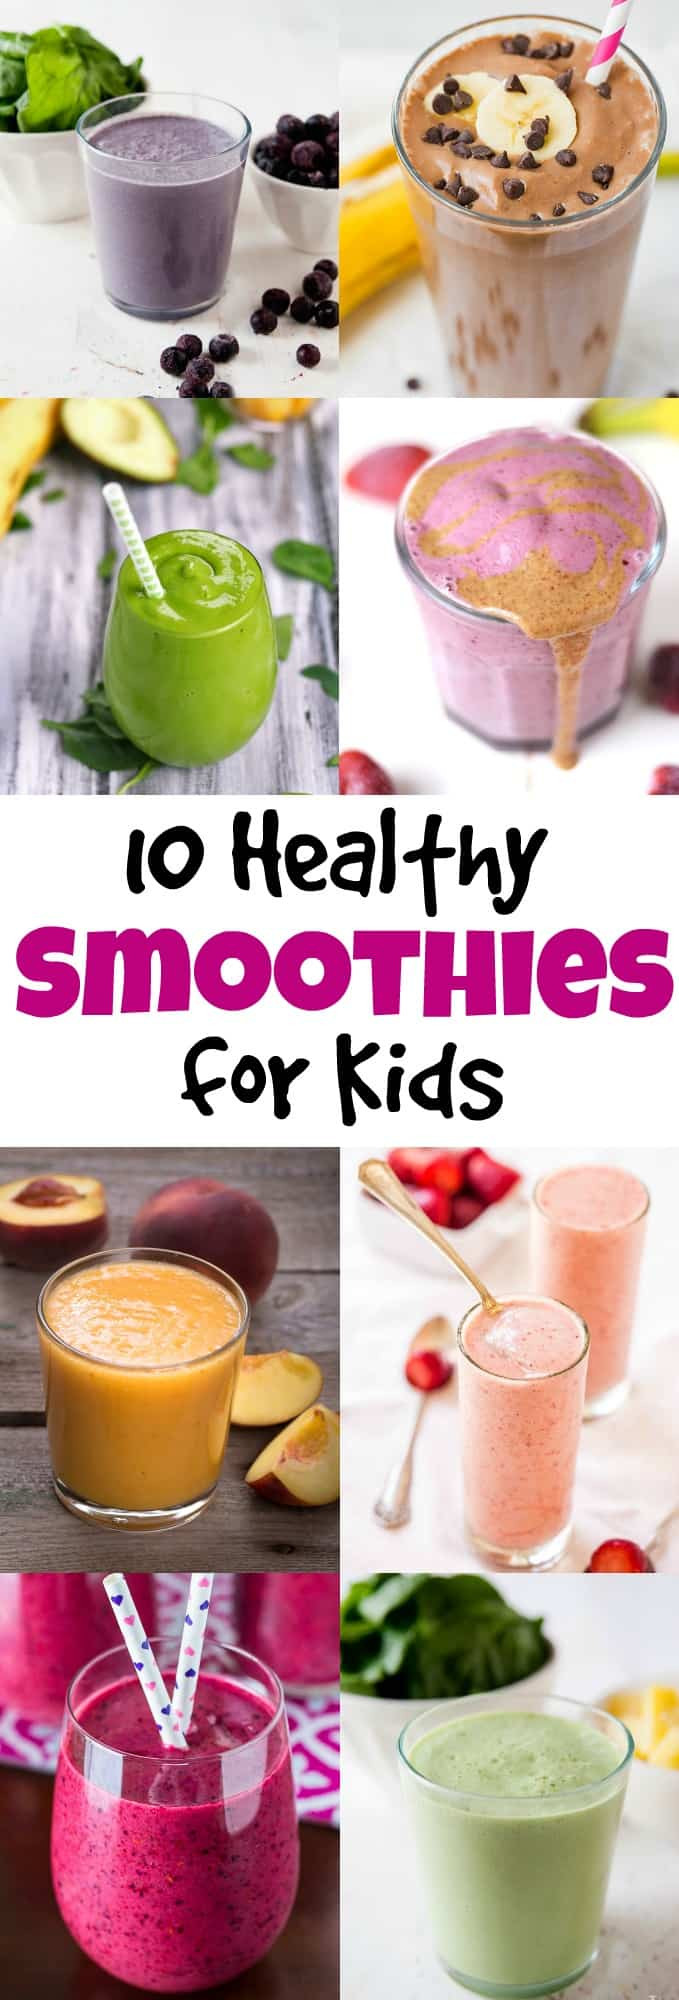 Healthy Smoothie Recipes For Kids
 10 Healthy Smoothies for Kids MOMables Mealtime